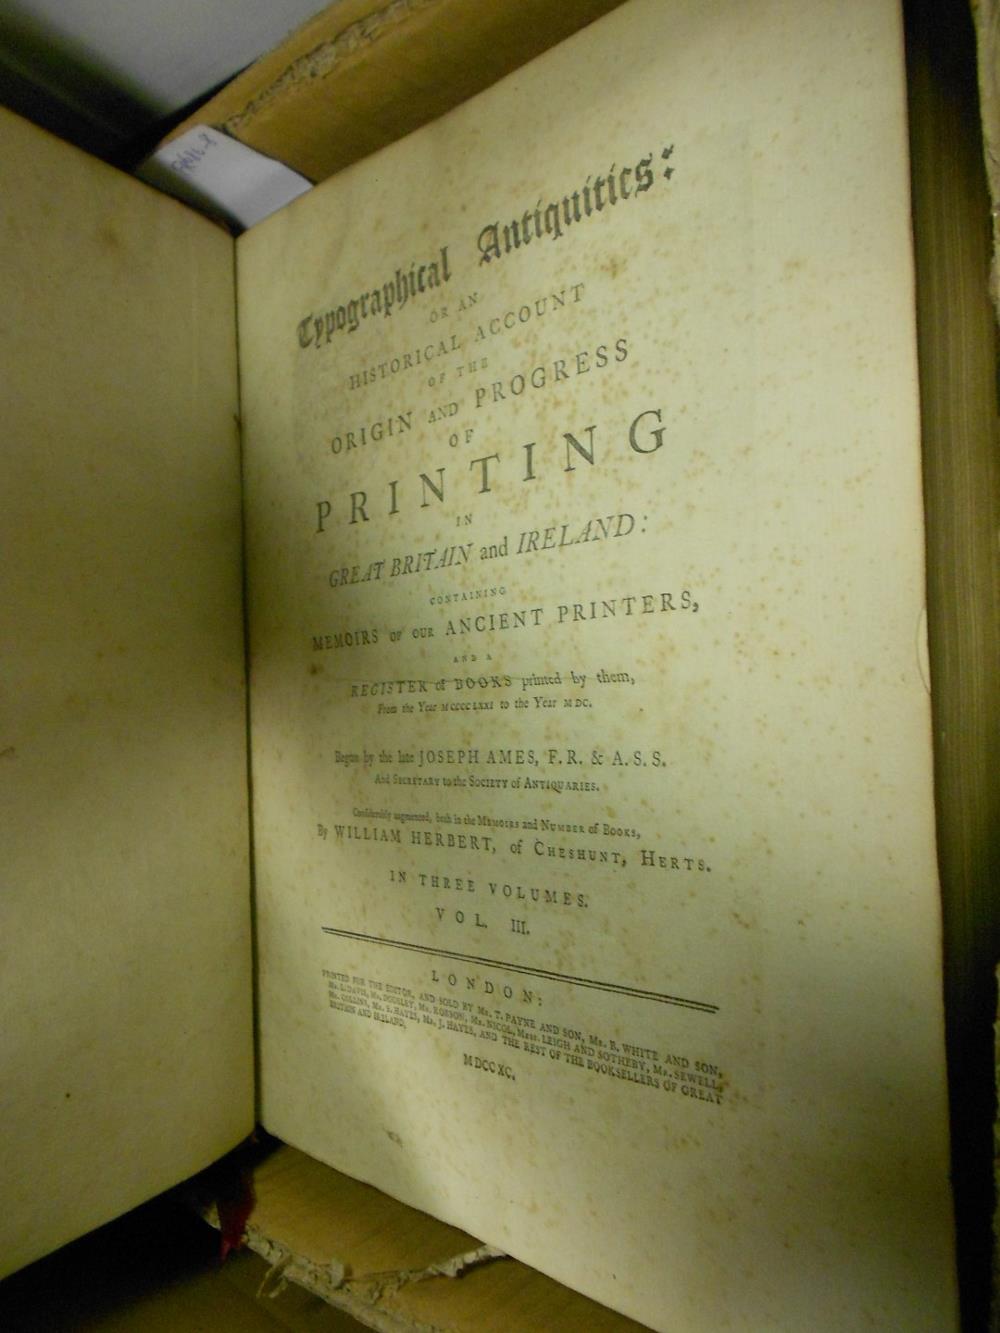 AMES (Joseph) Typographical Antiquities.., augmented by William Herbert, in 3 vols., 1786-90, 4to,